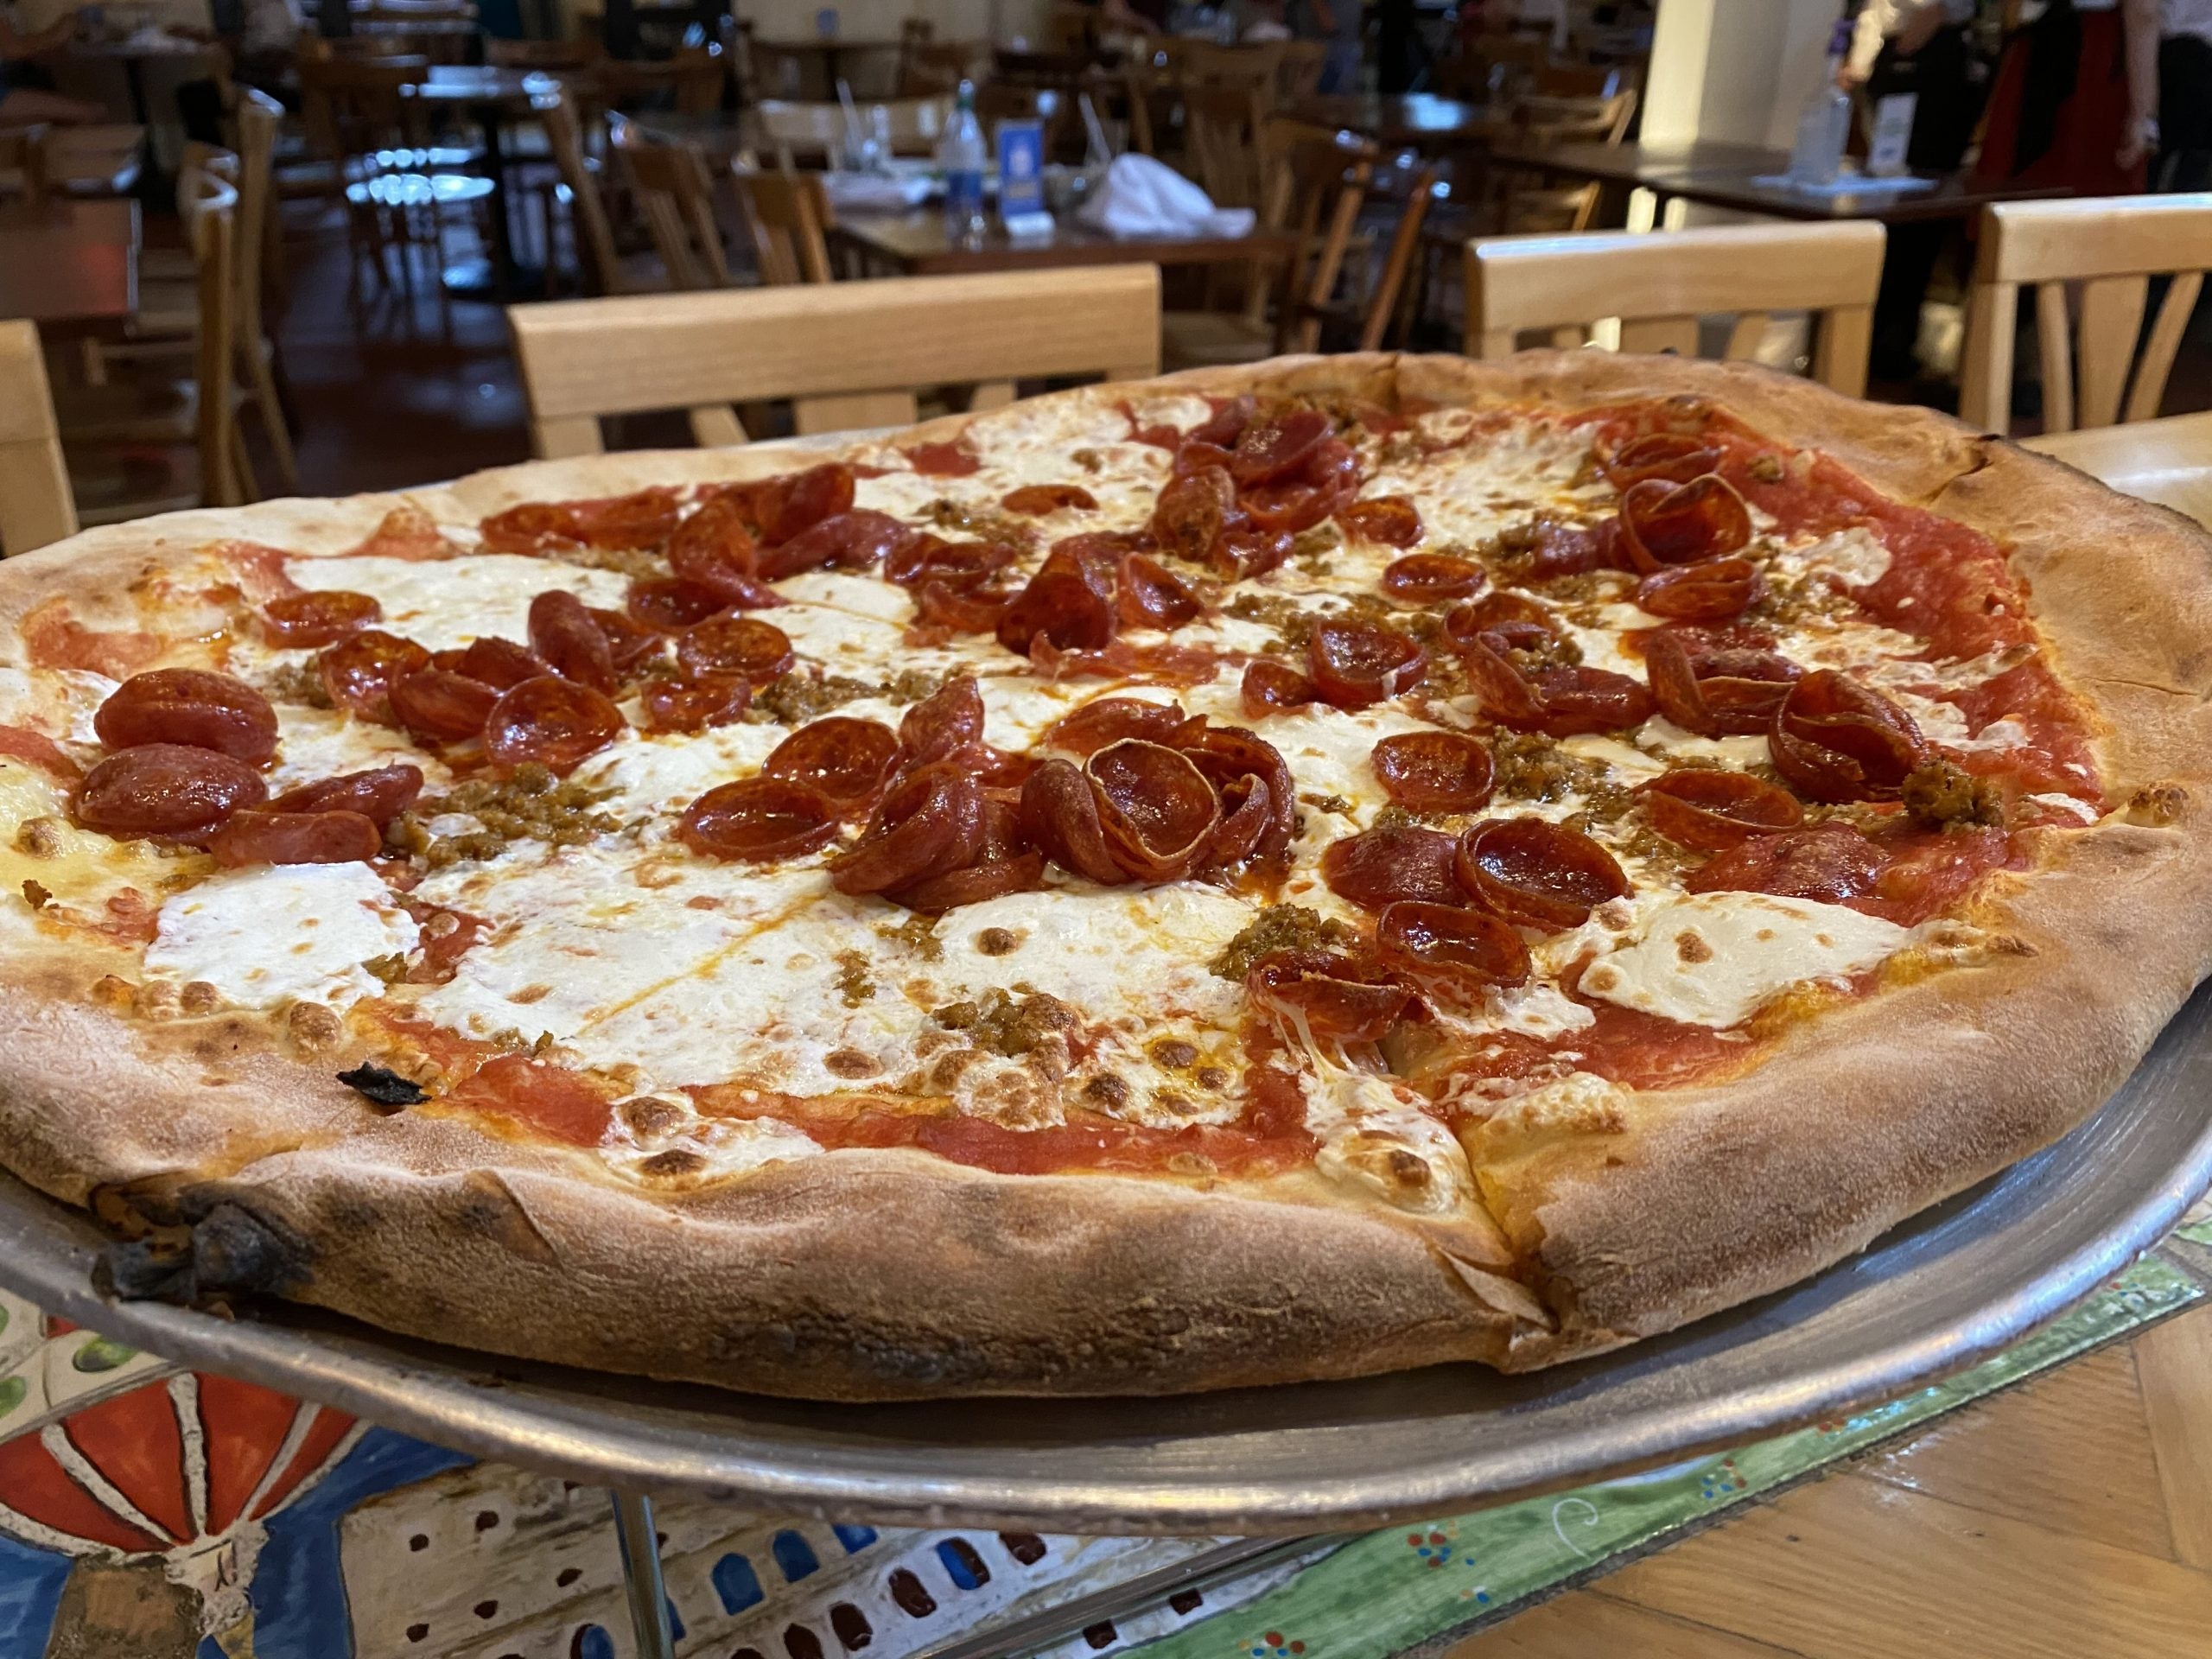 A large pizza with sausage is served on an aluminum pan at the Via Napoli restaurant at Epcot in Disney World